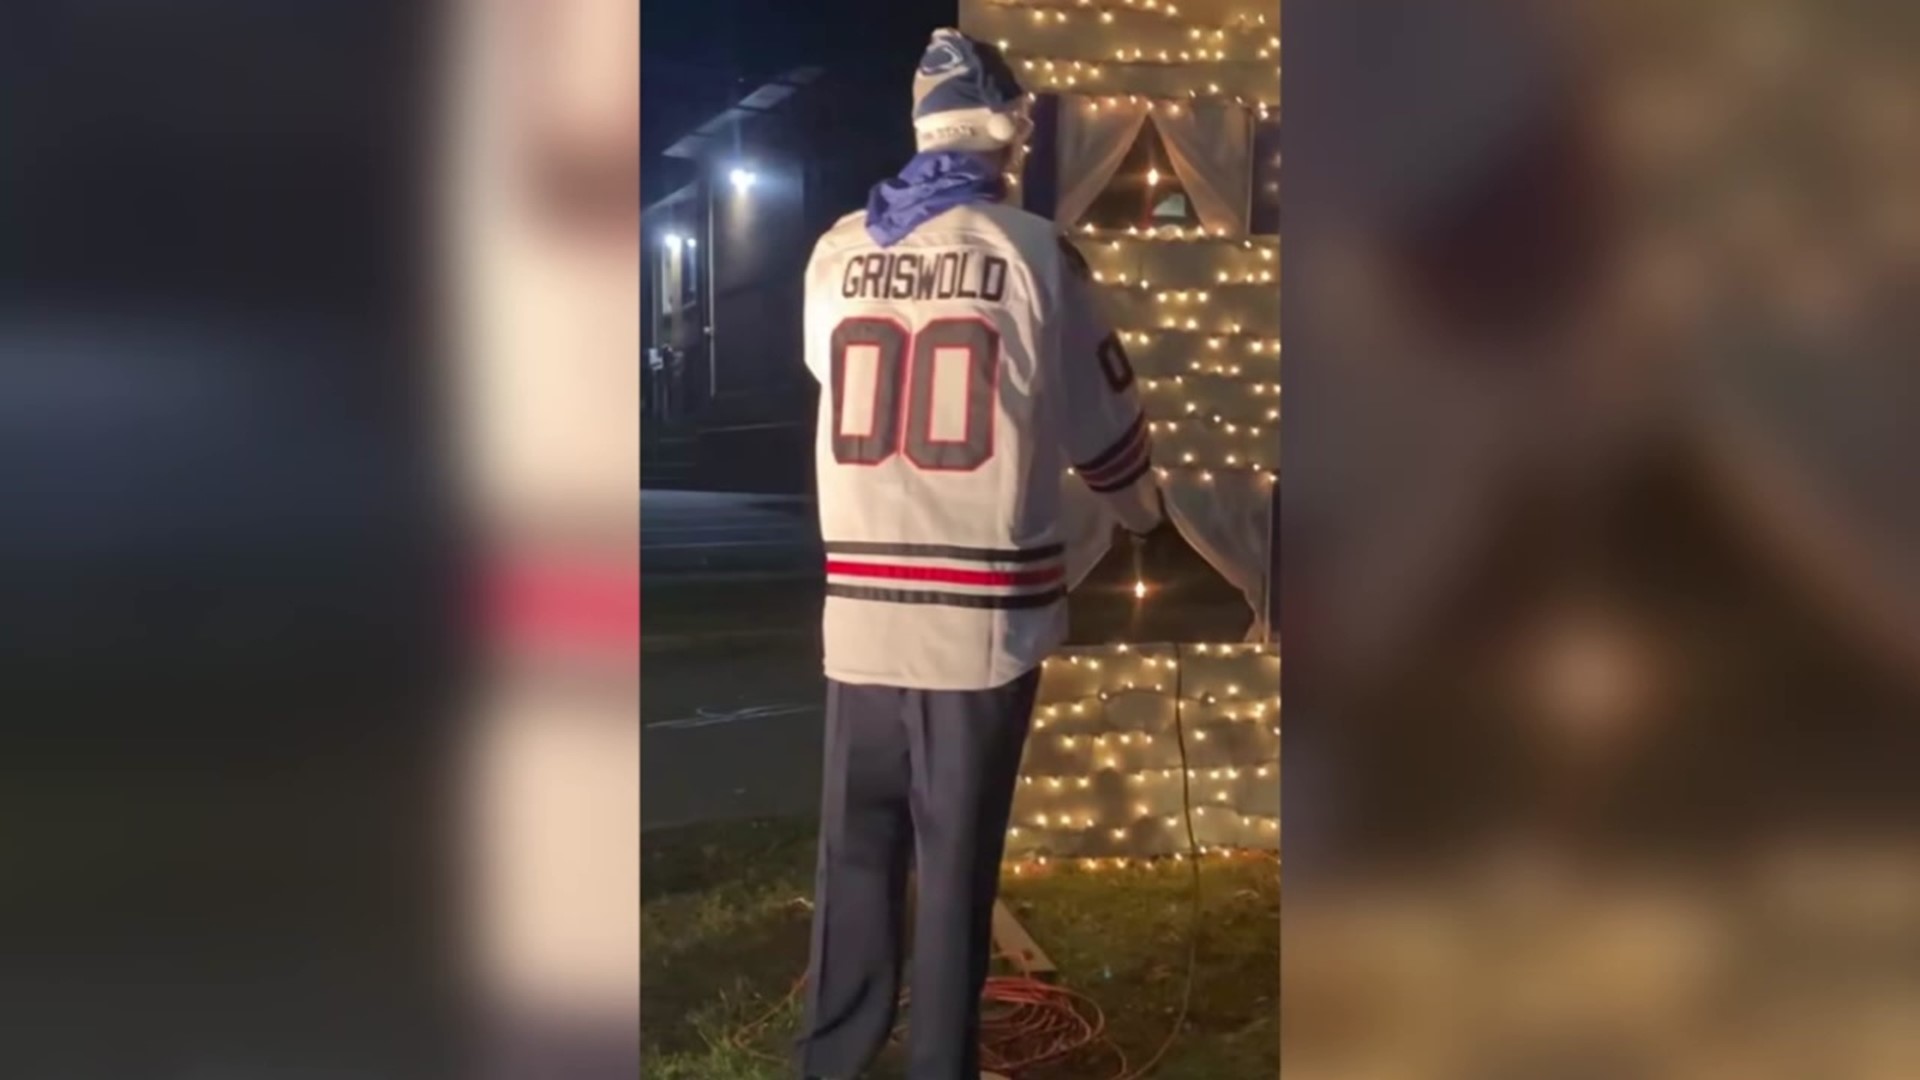 Berwick's mayor says a Clark Griswold jersey was mailed back to the borough.